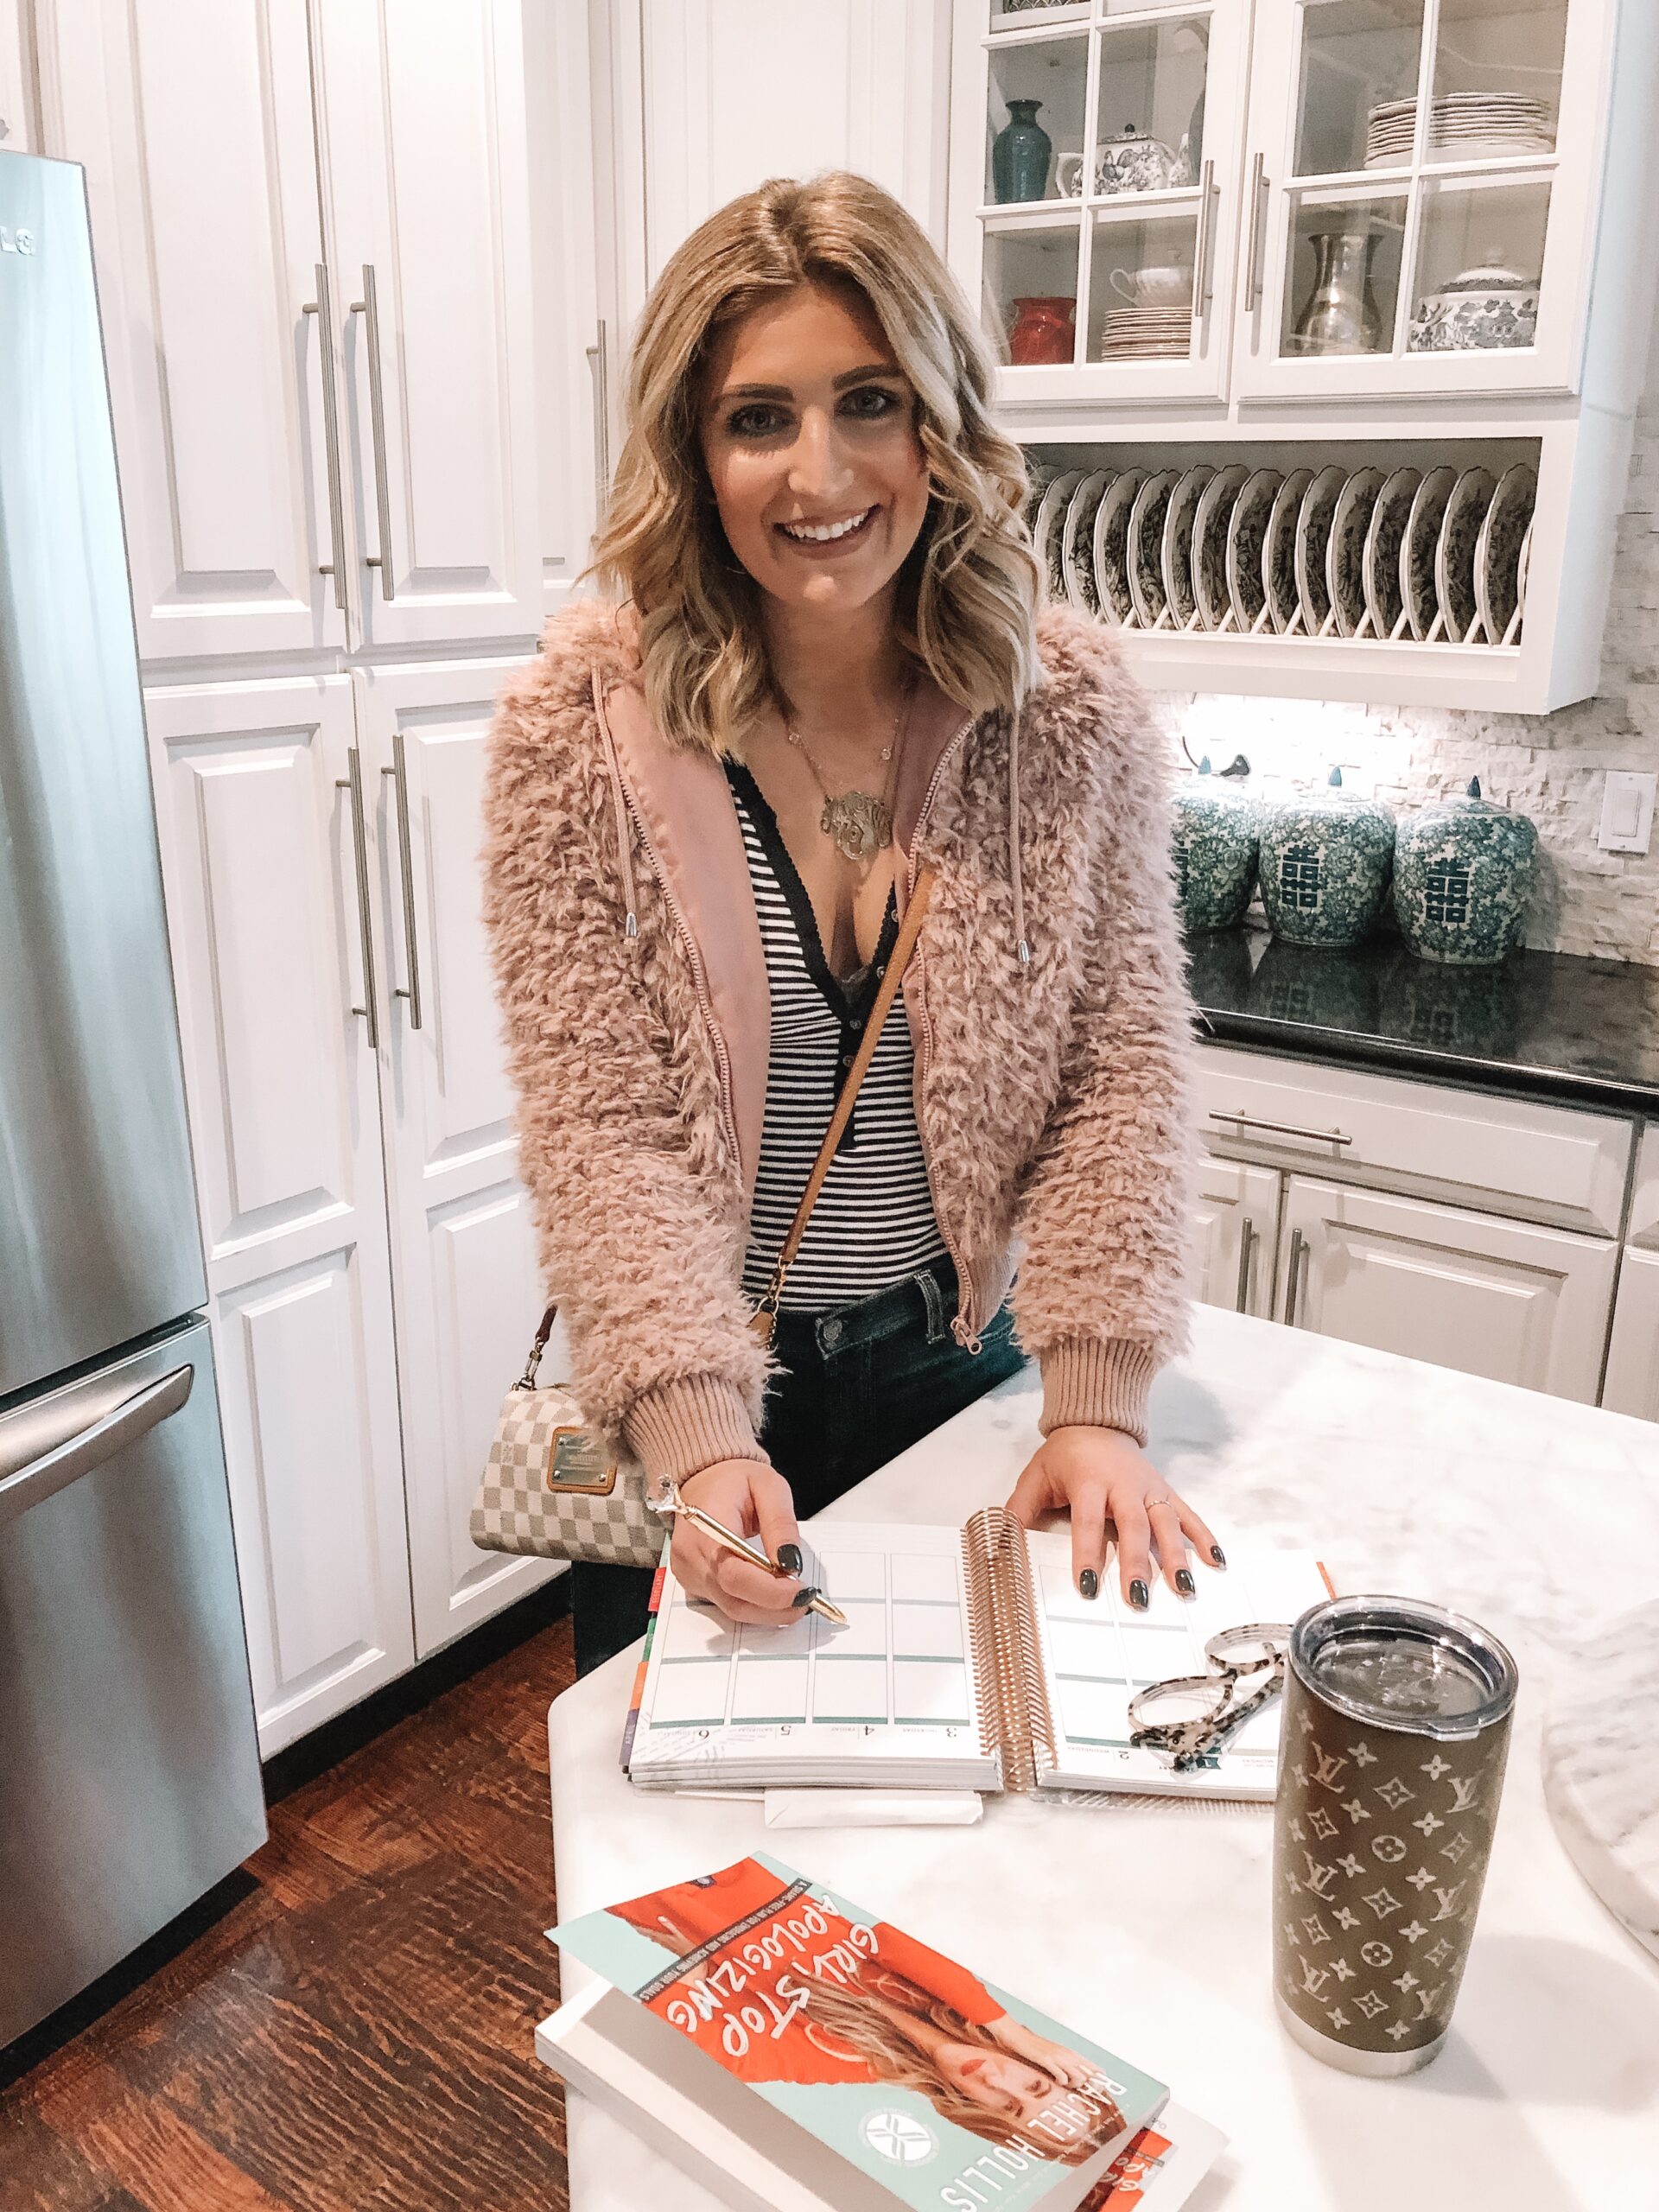 New Year Resolutions 2019 | New Year Goals | Audrey Madison Stowe a fashion and lifestyle blogger